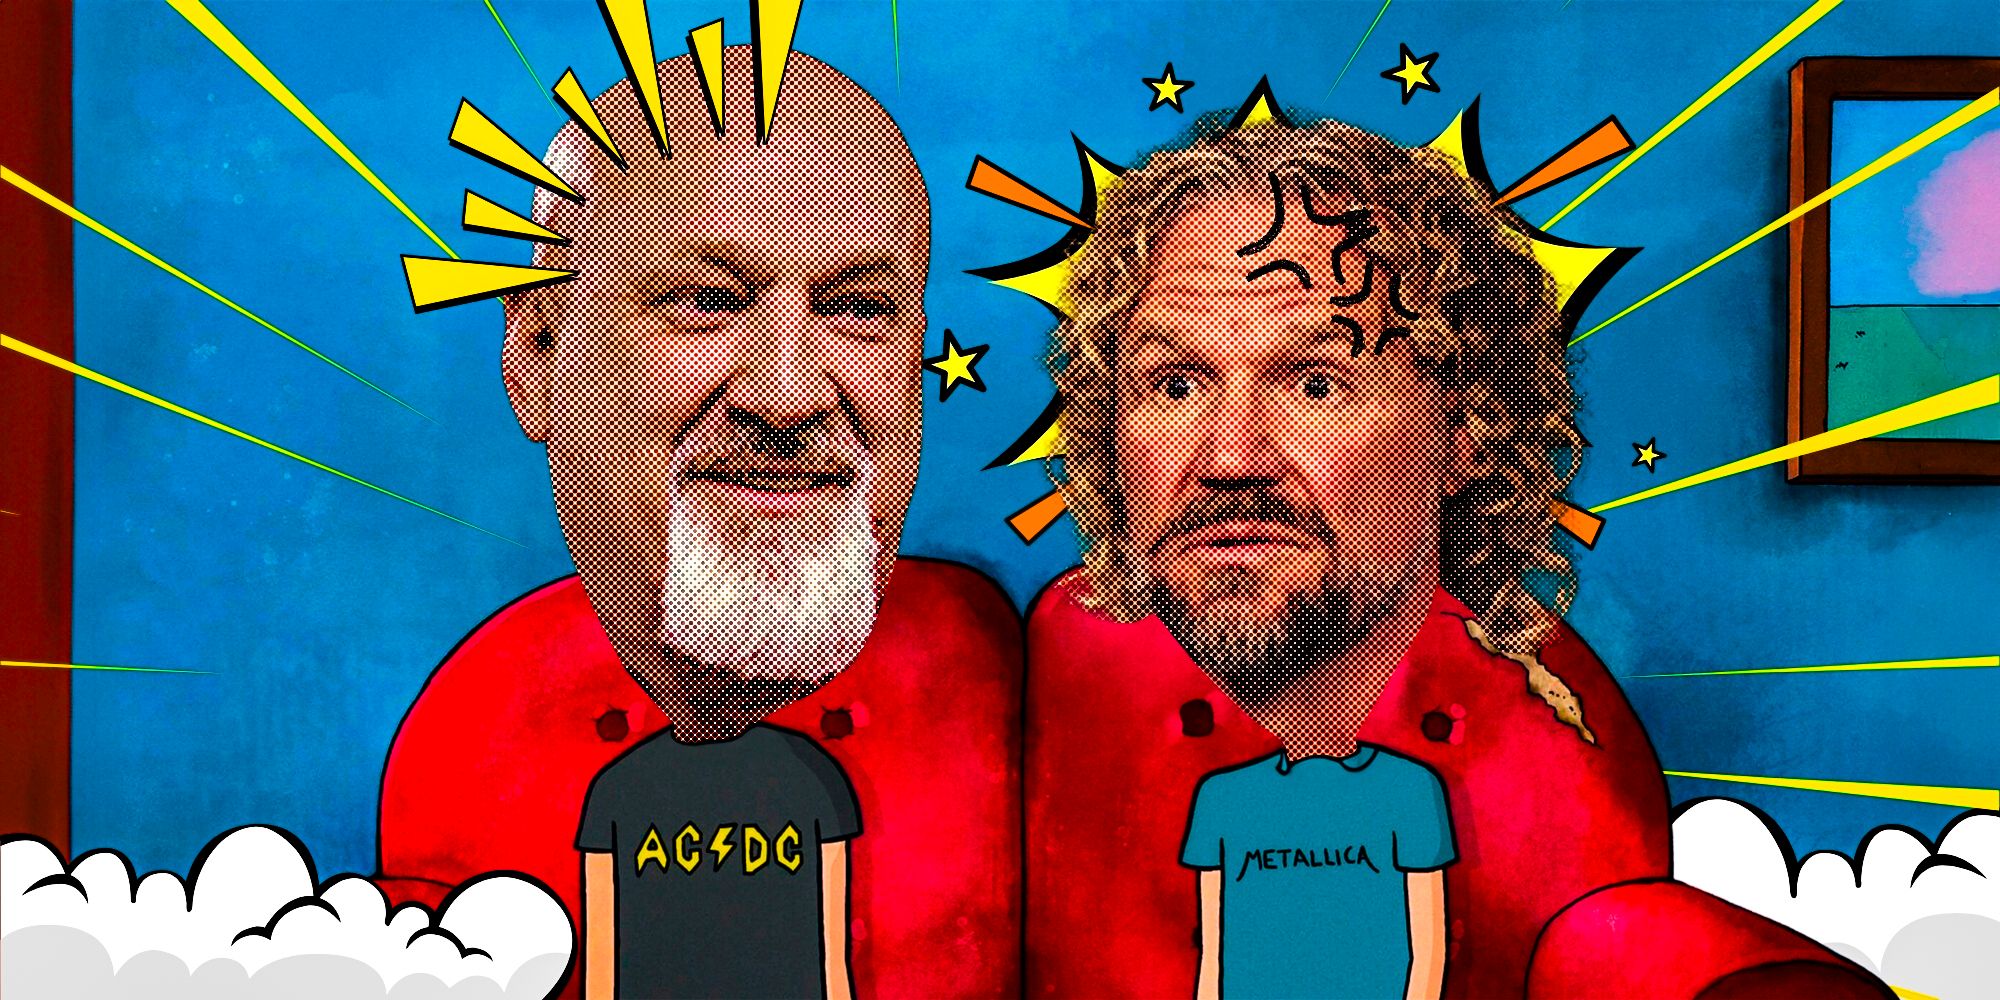 Sister Wives David Woolley and Kody Brown's heads on top of characters Beavis and Butthead's bodies in comic background